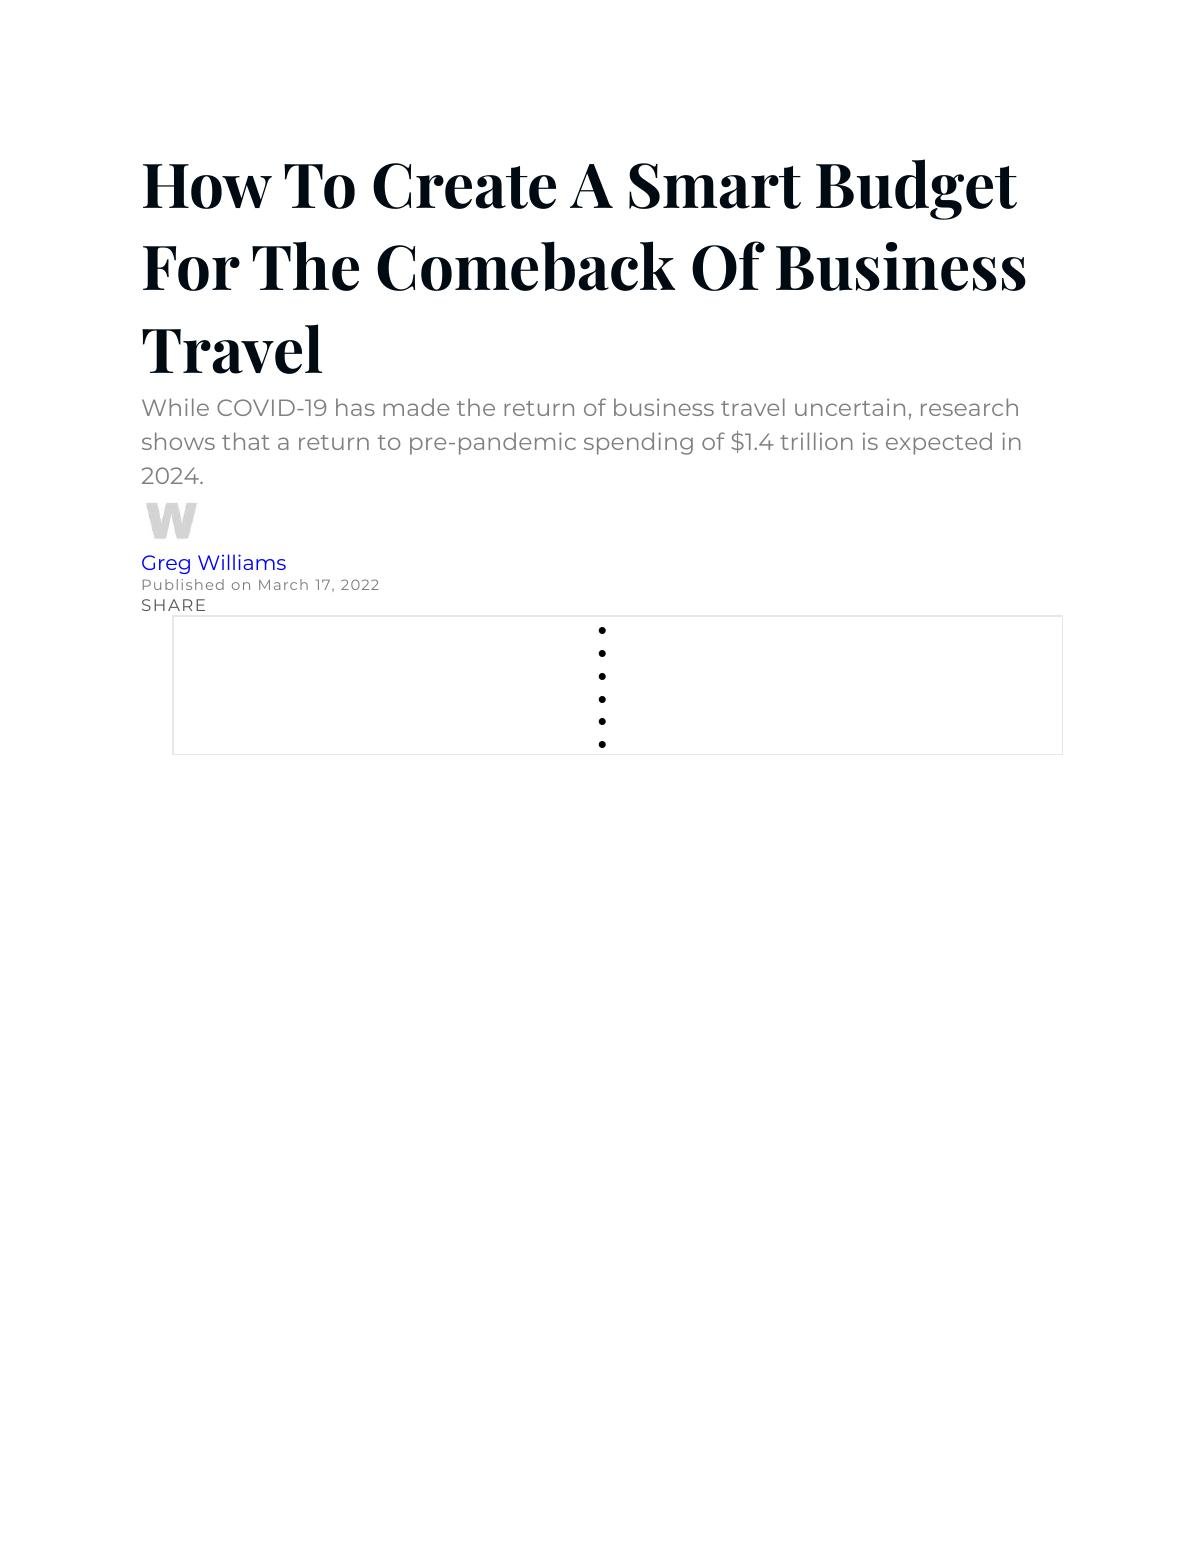 How To Create A Smart Budget For The Comeback Of Business Travel